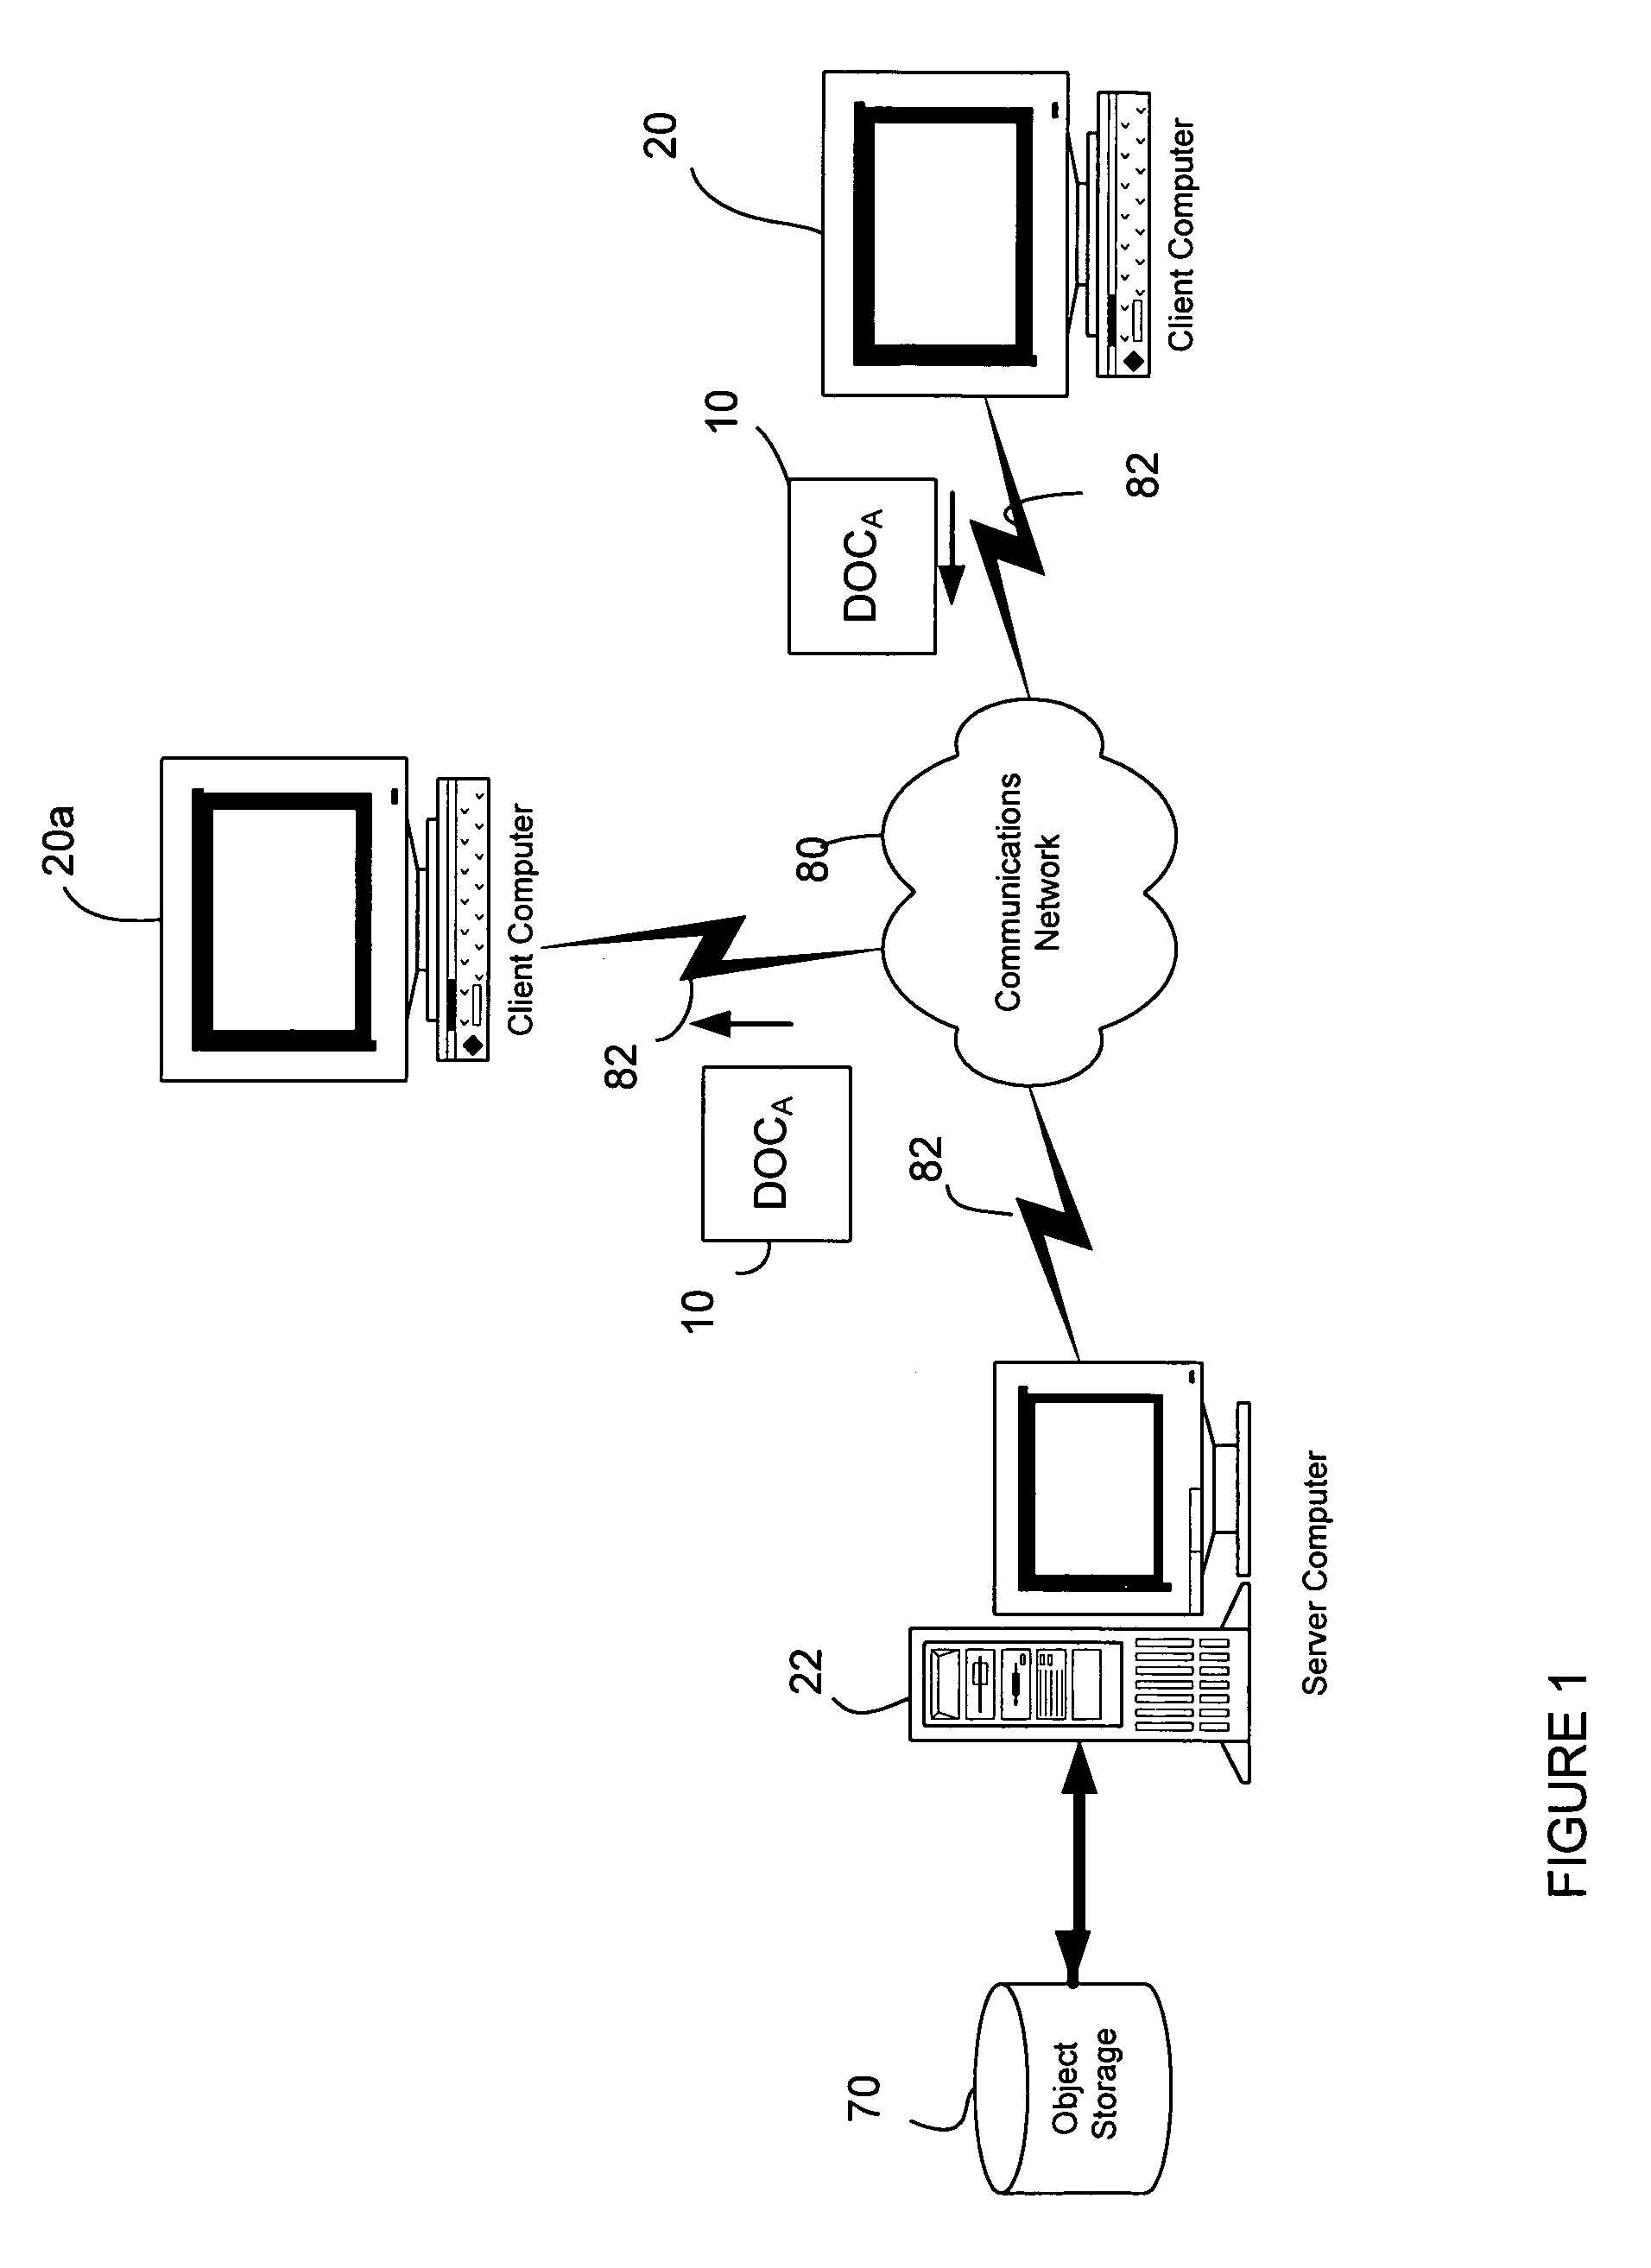 Method for abstract state transitions without requiring state machine knowledge